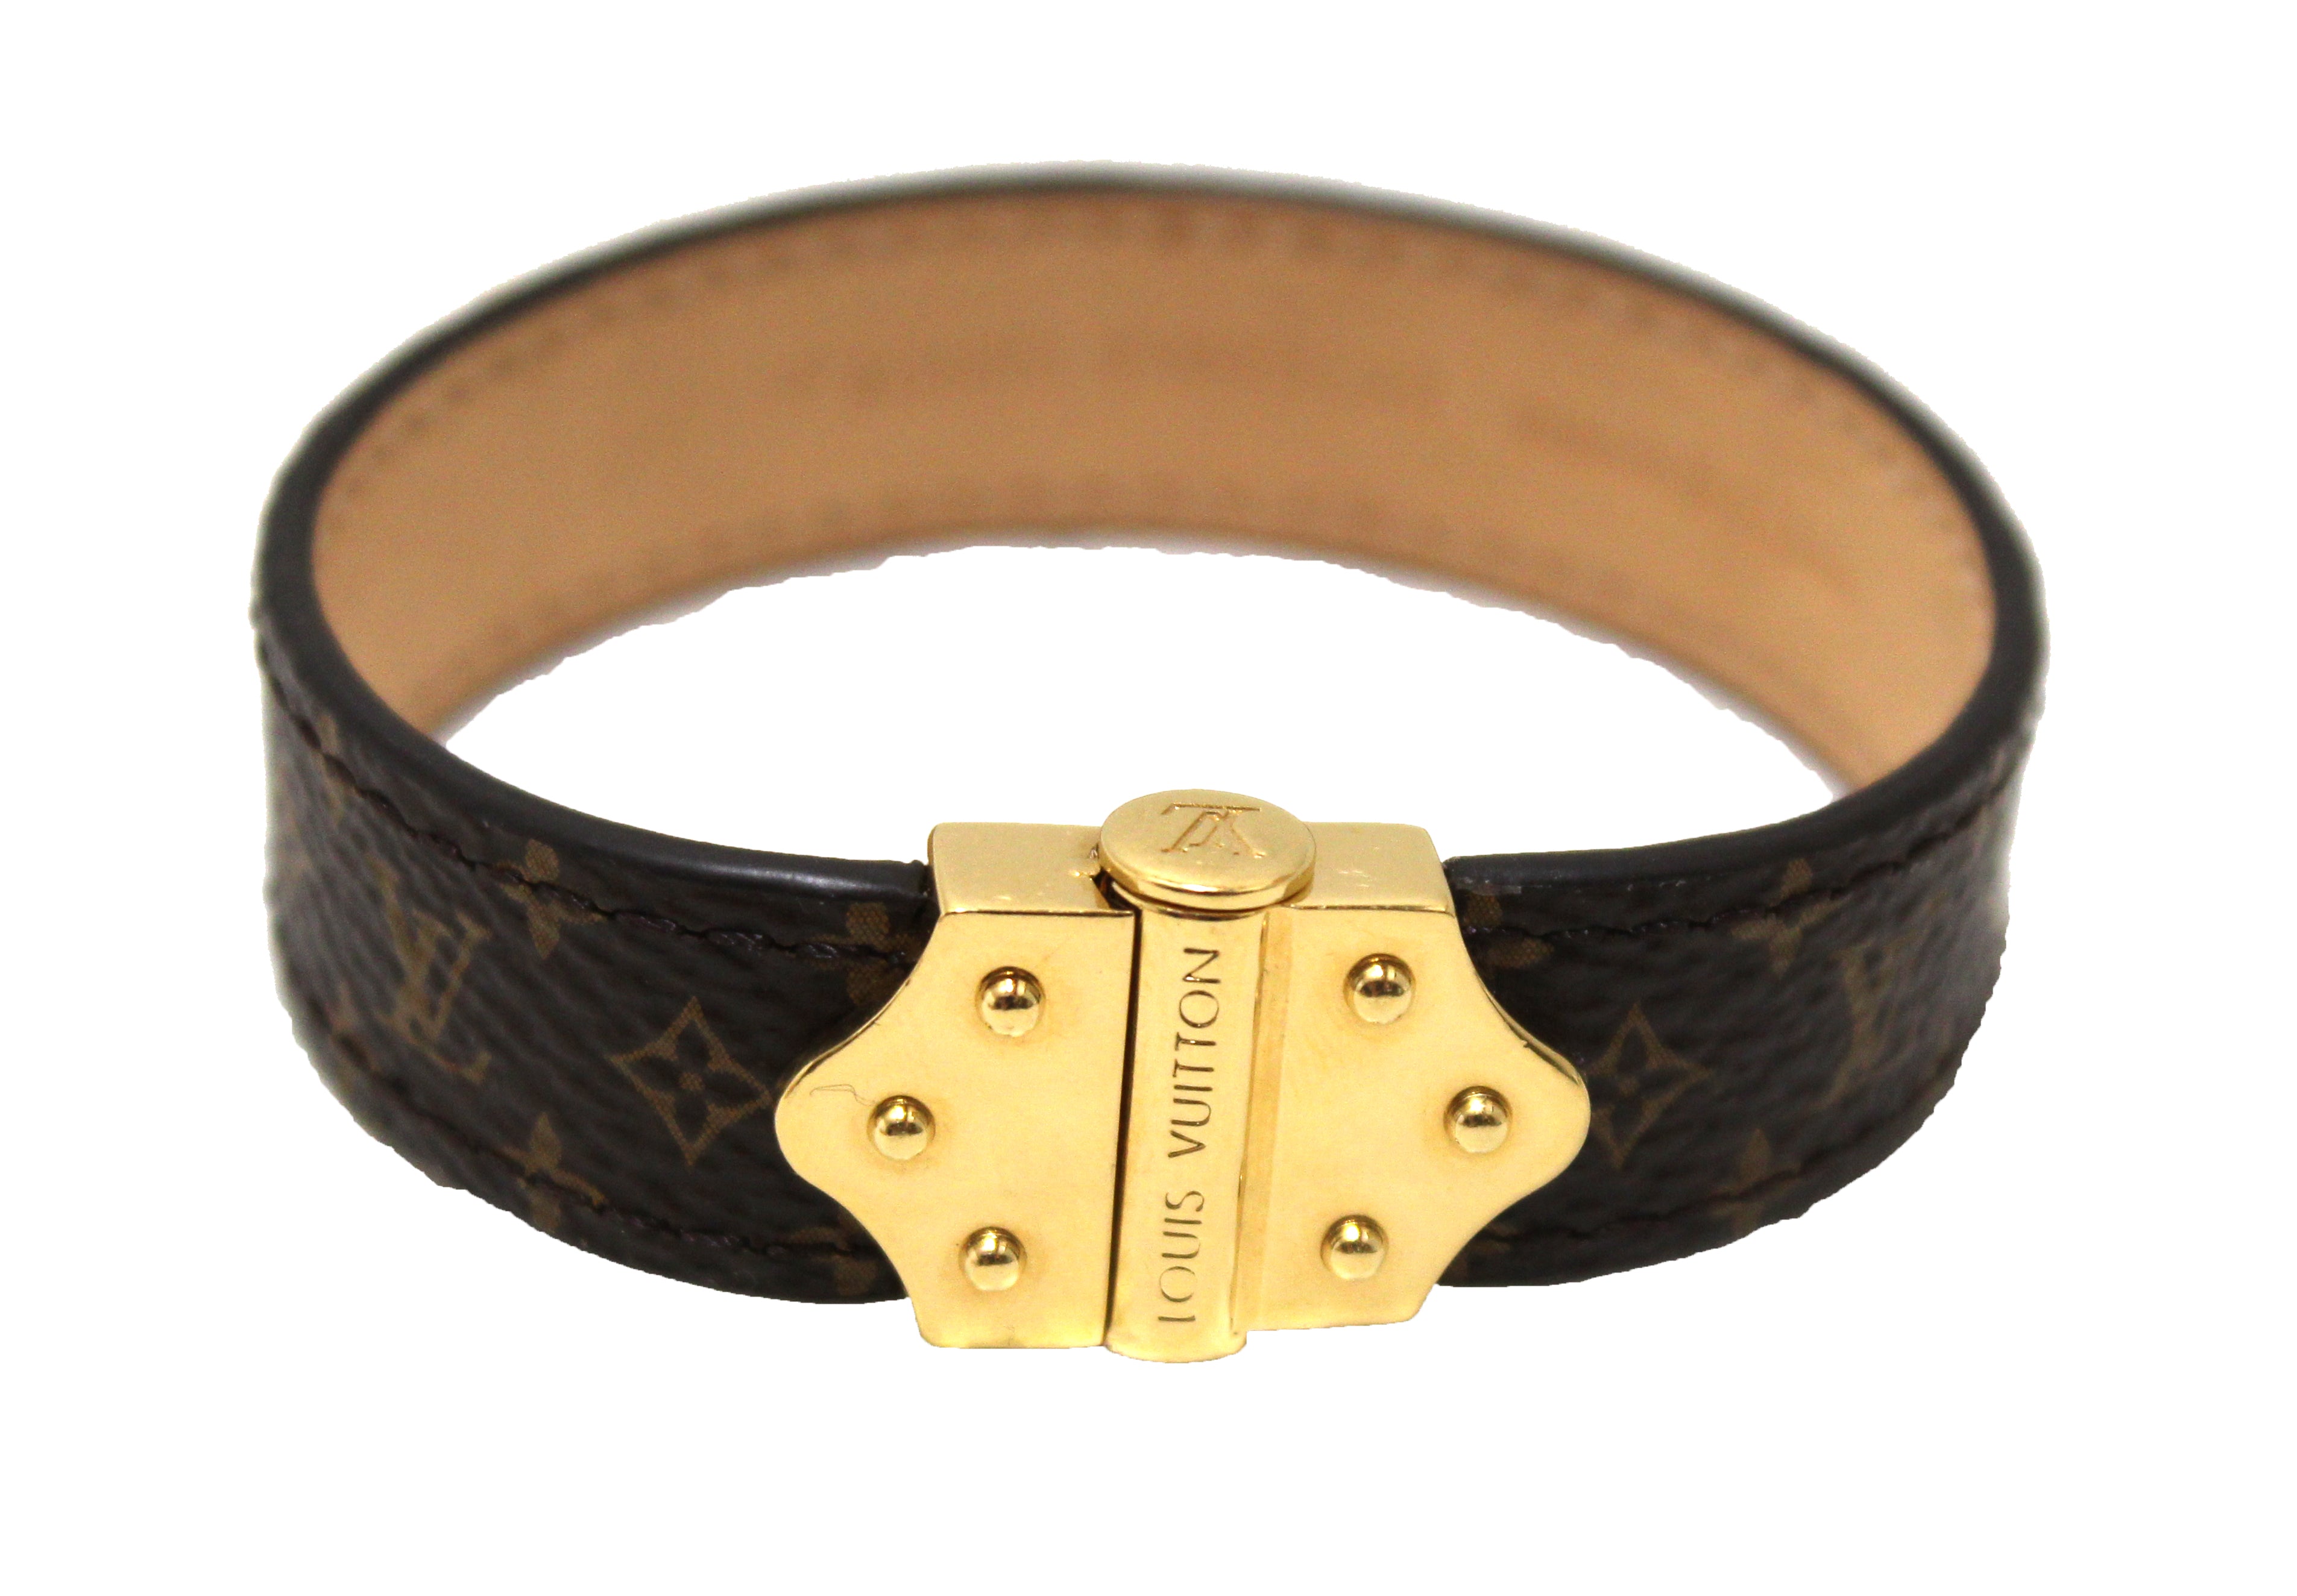 Louis Vuitton, Jewelry, Gently Used Authentic Louis Vuitton Bracelet